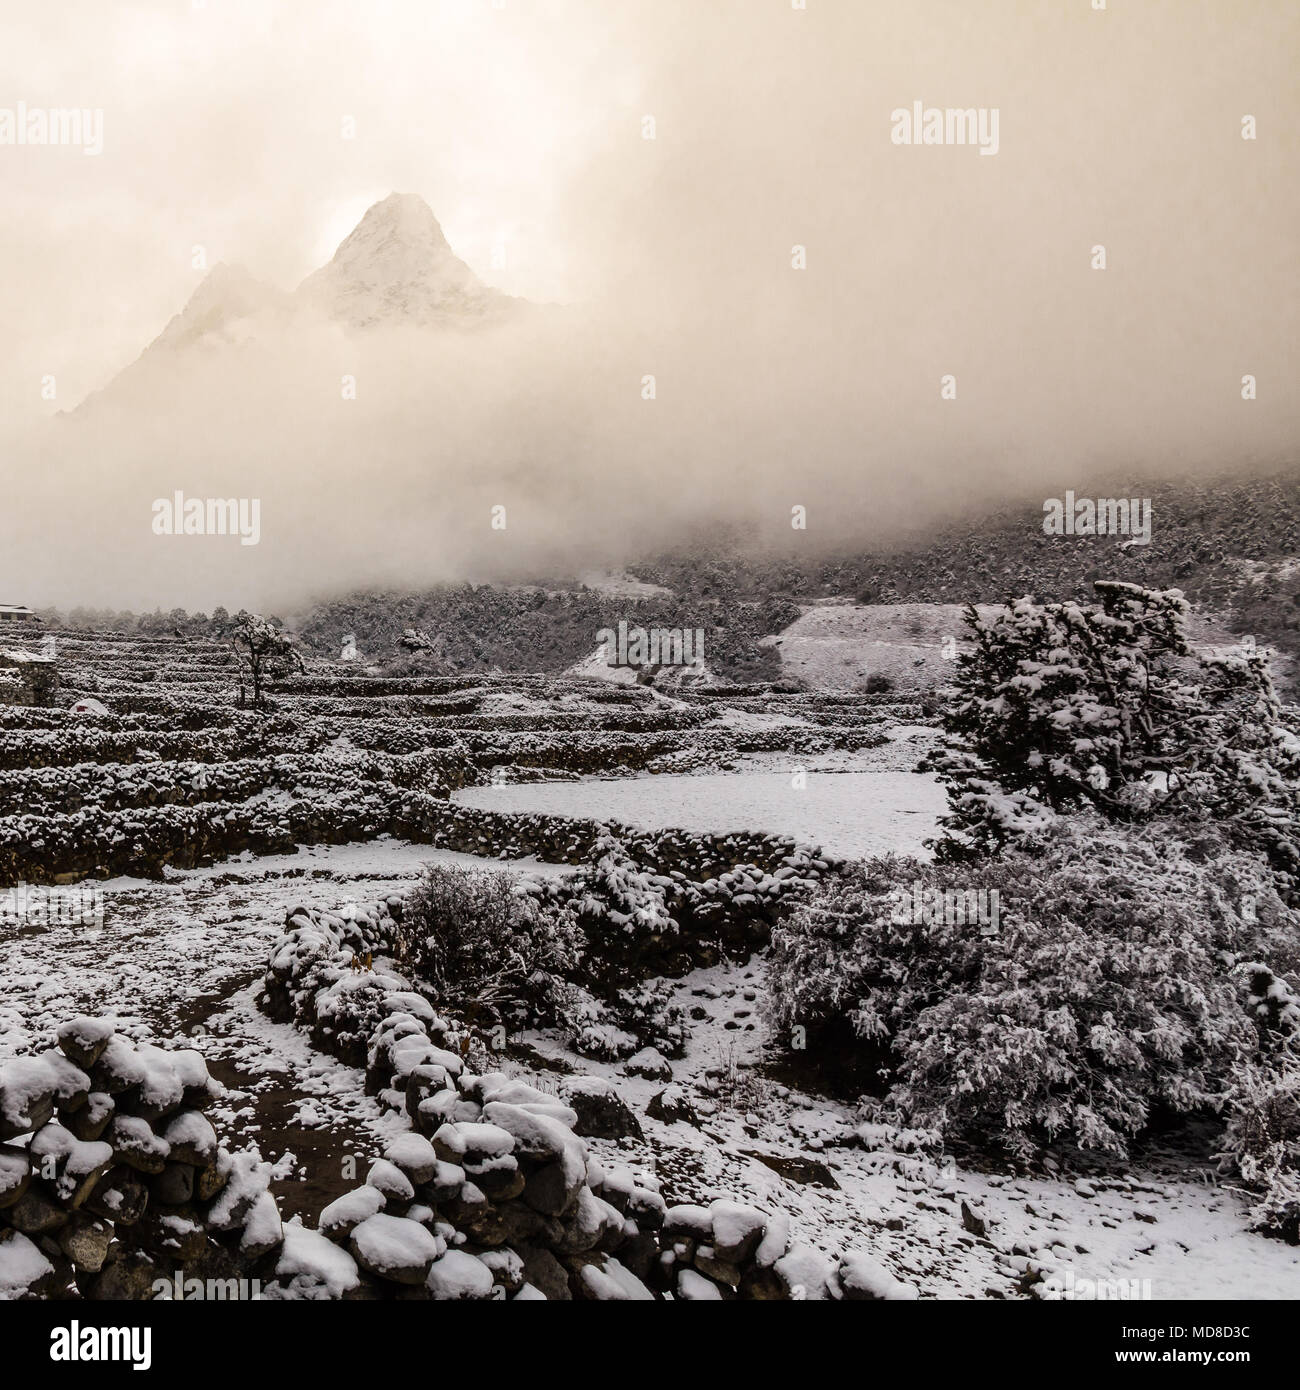 With fresh snow covering rock walls and fields in foreground, iconic shape of Ama Dablam mountain appears briefly through a gap in the clouds, Nepal Stock Photo